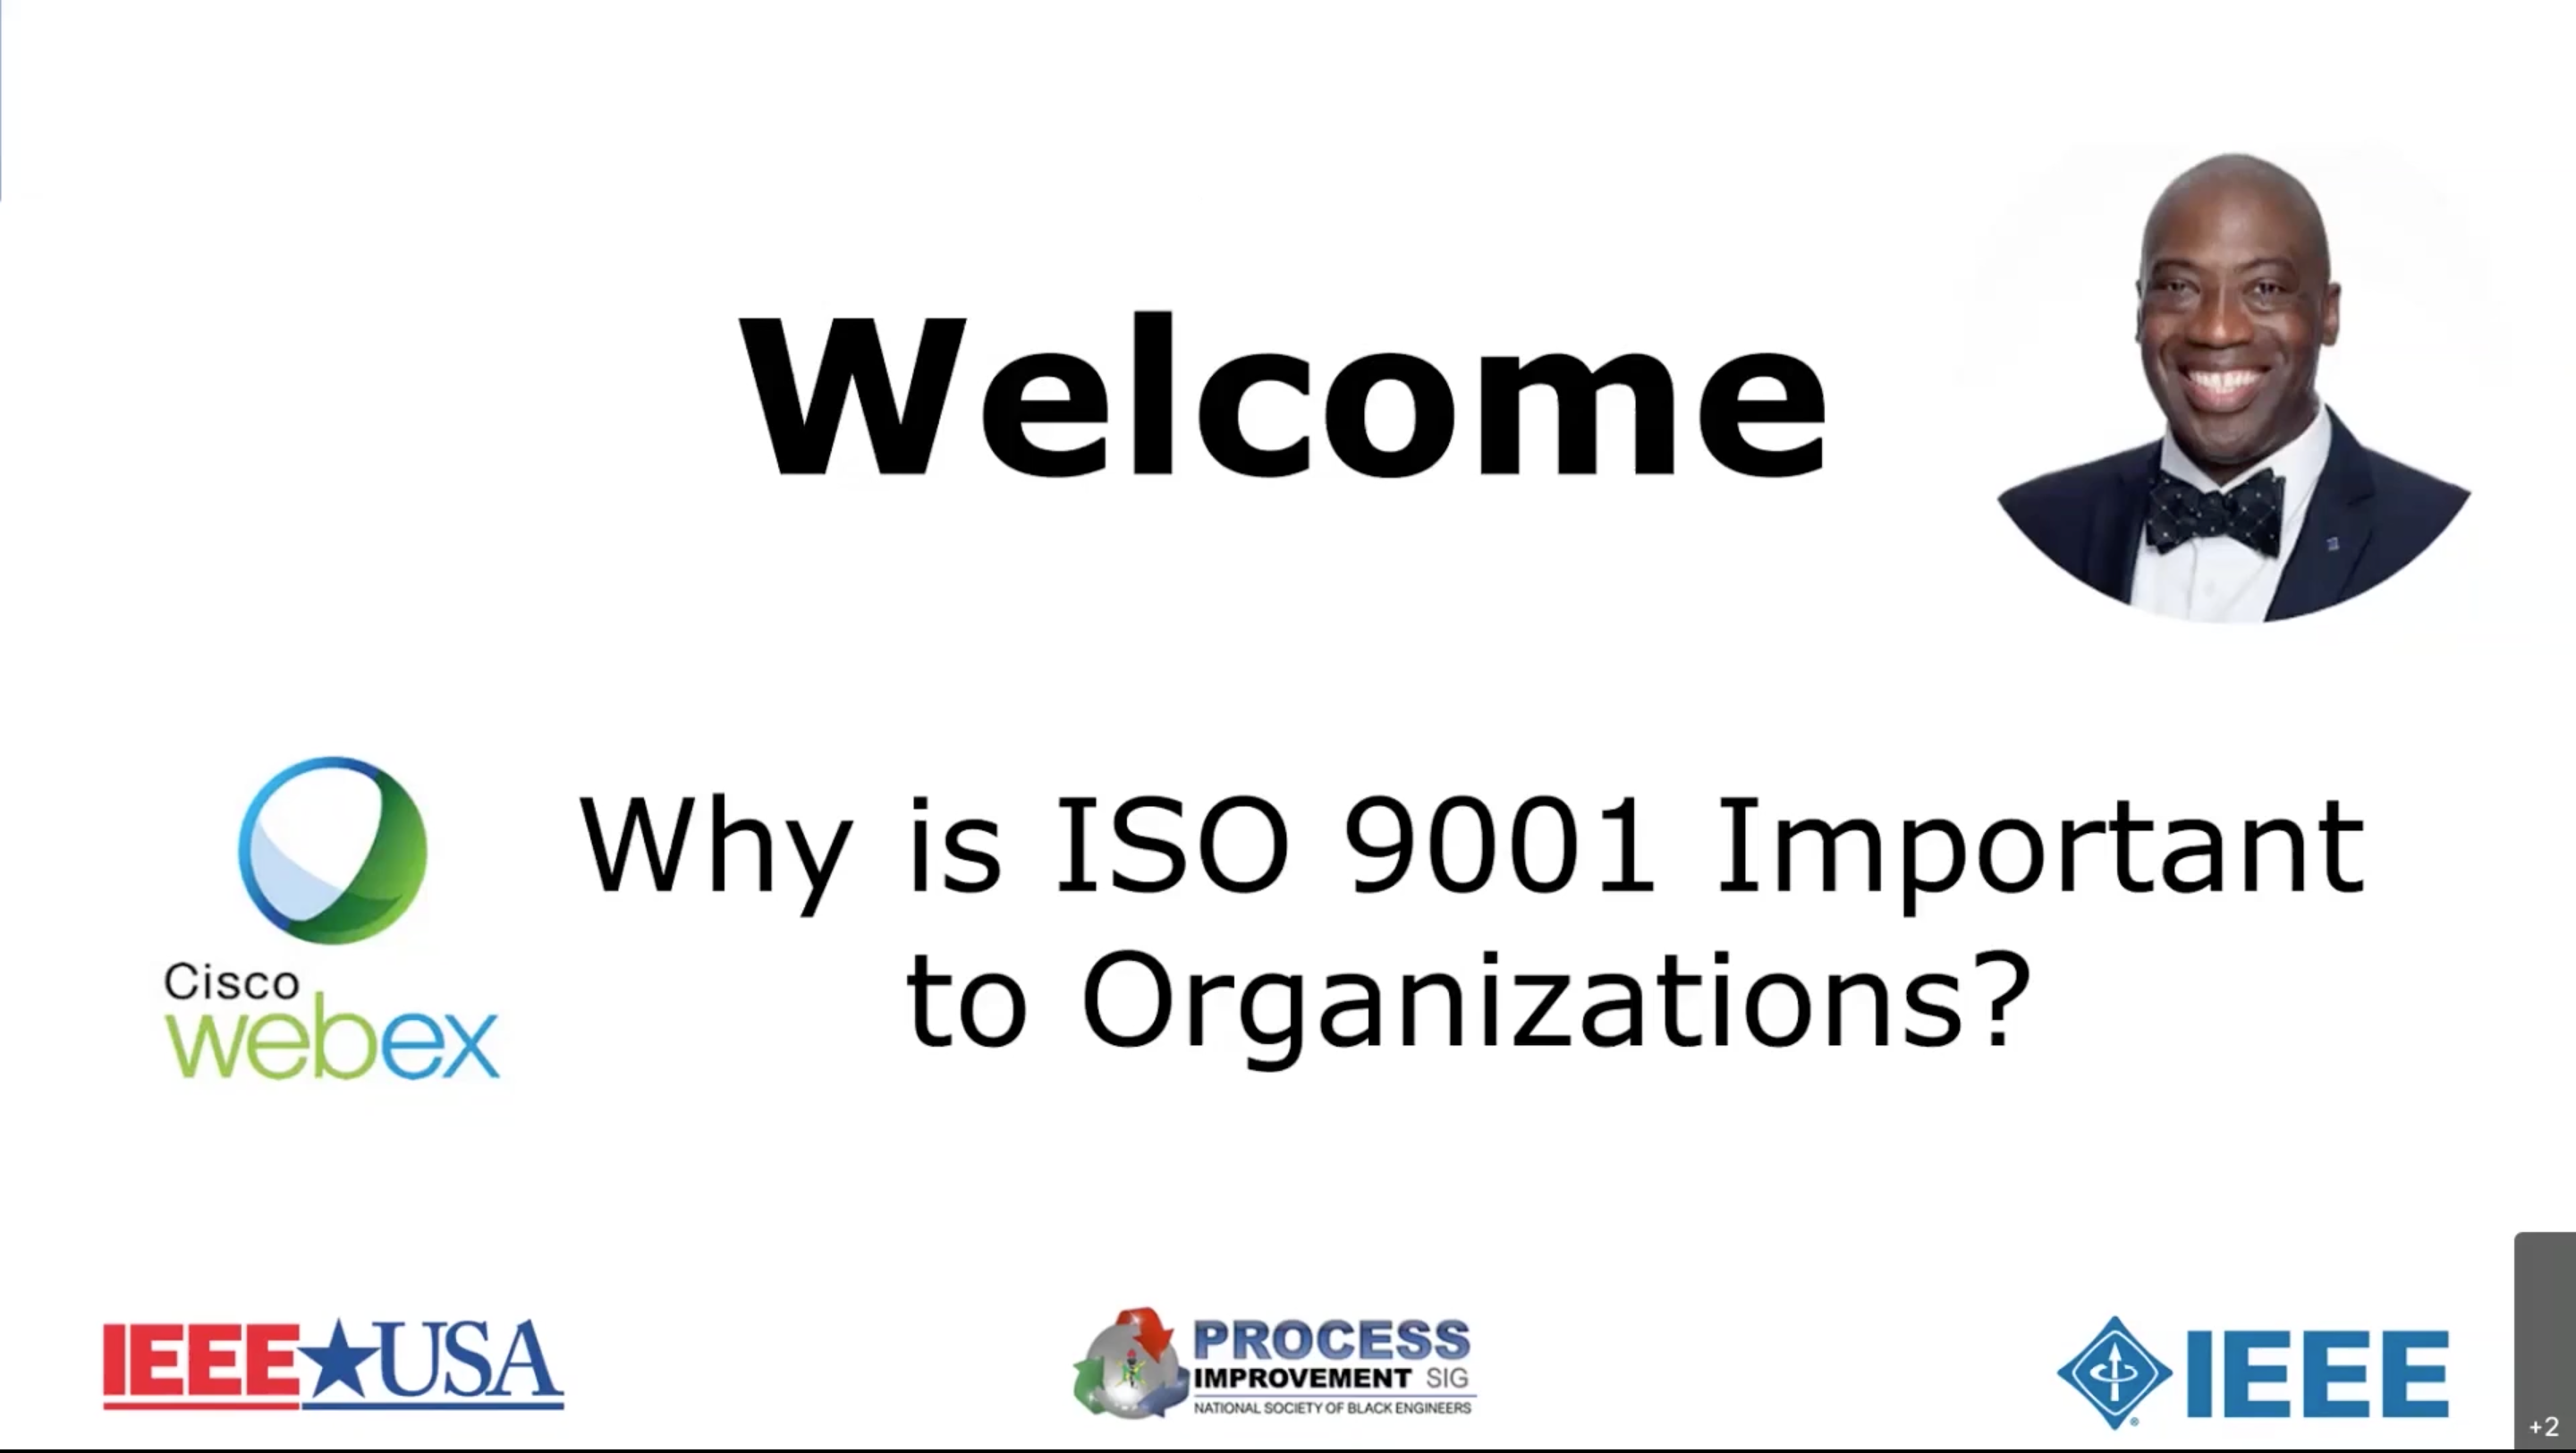 Why is ISO 9001 important to organizations?